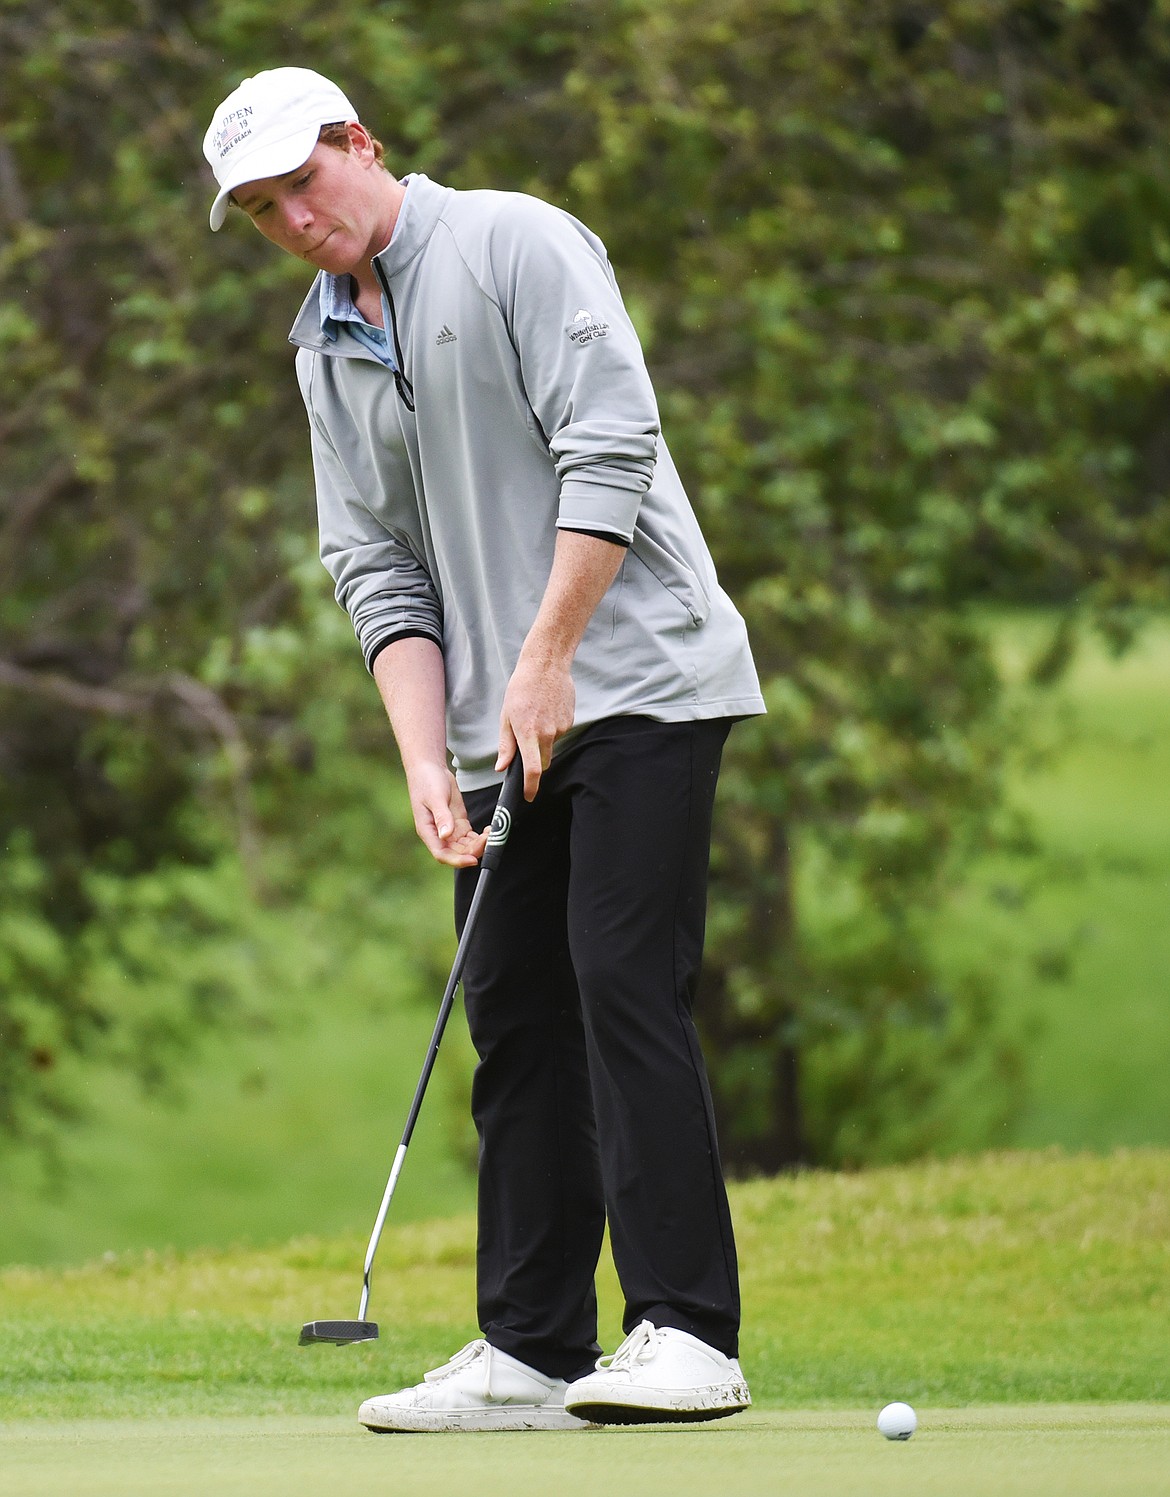 Cameron Kahle watches his putt on the 18th green of the North Course during the Earl Hunt 4th of July Tournament at Whitefish Lake Golf Club on Thursday, July 2. (Casey Kreider/Daily Inter Lake)